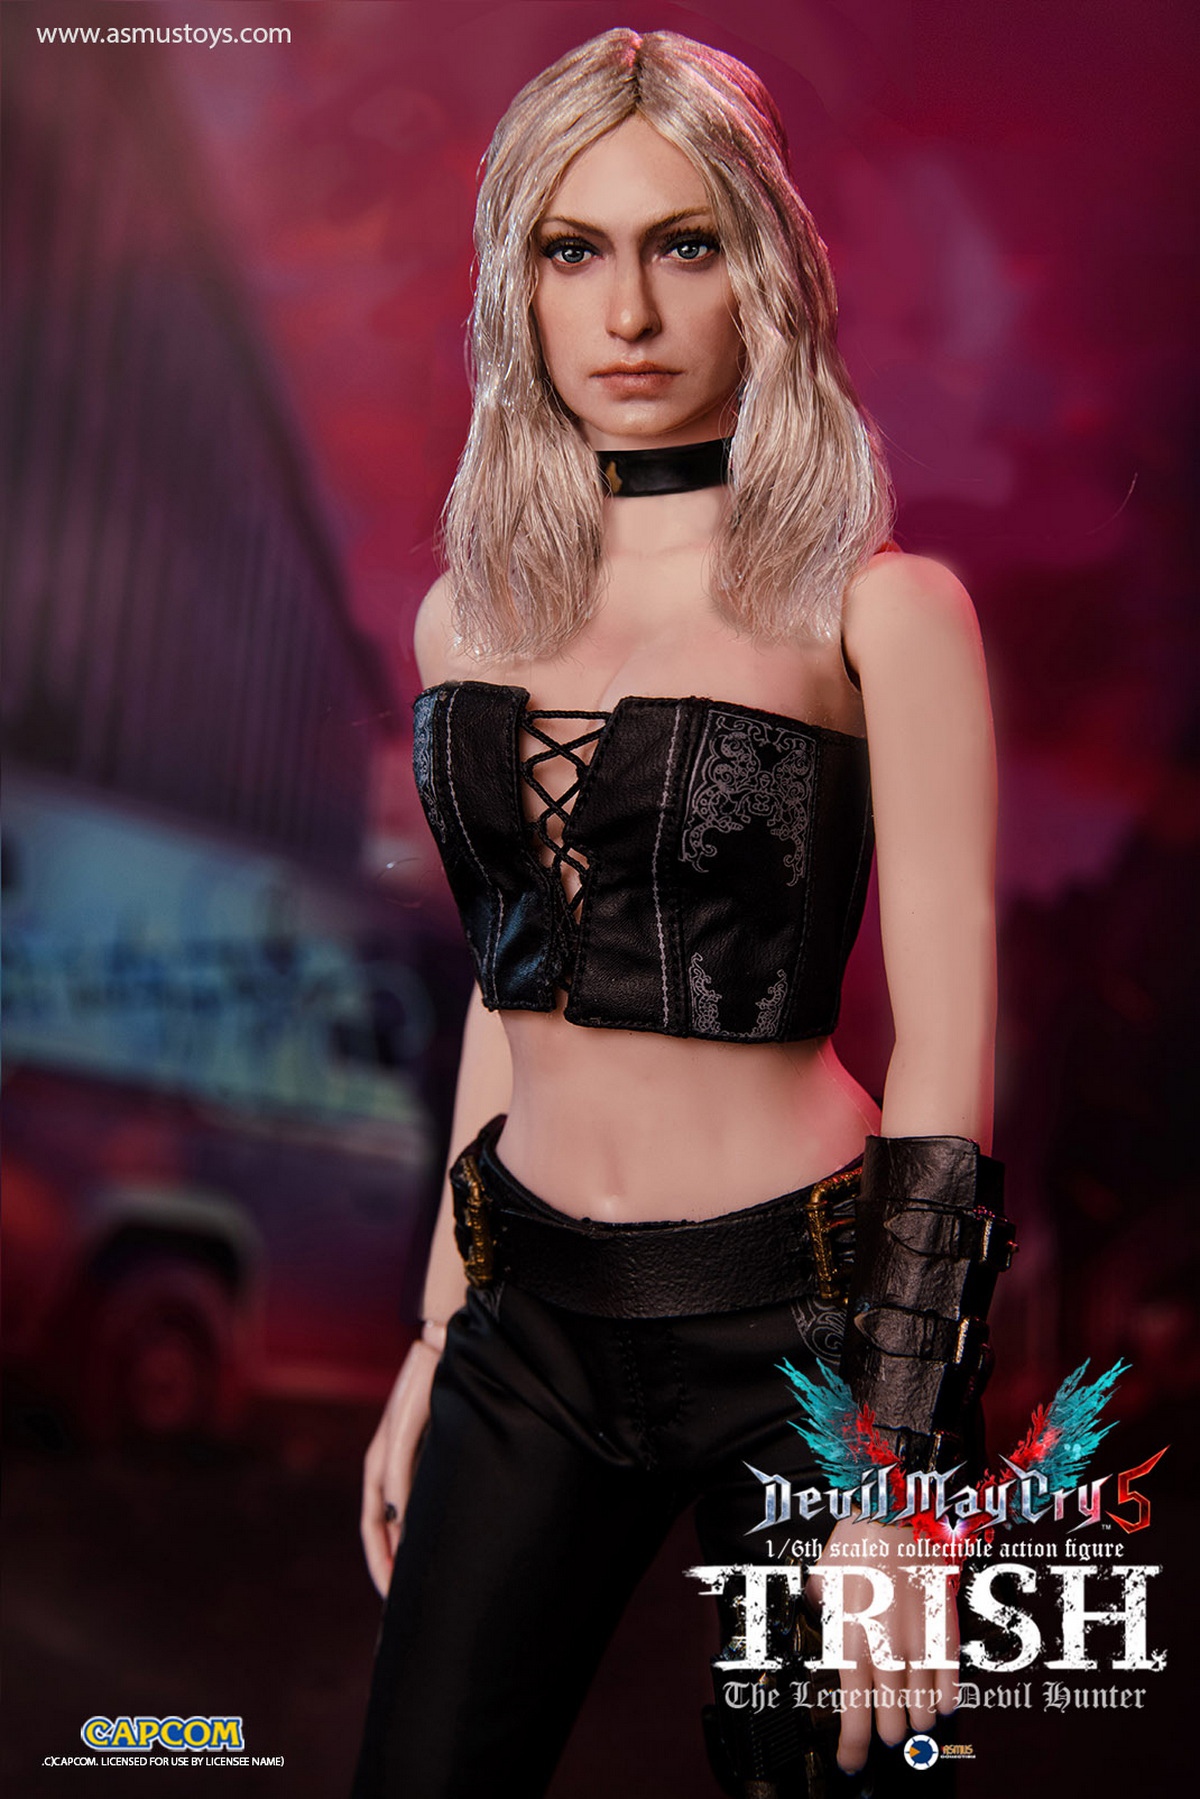 devilmaycry - NEW PRODUCT: Asmus New Toys: "Devil May Cry 5" - Trish (DMC504) 0325